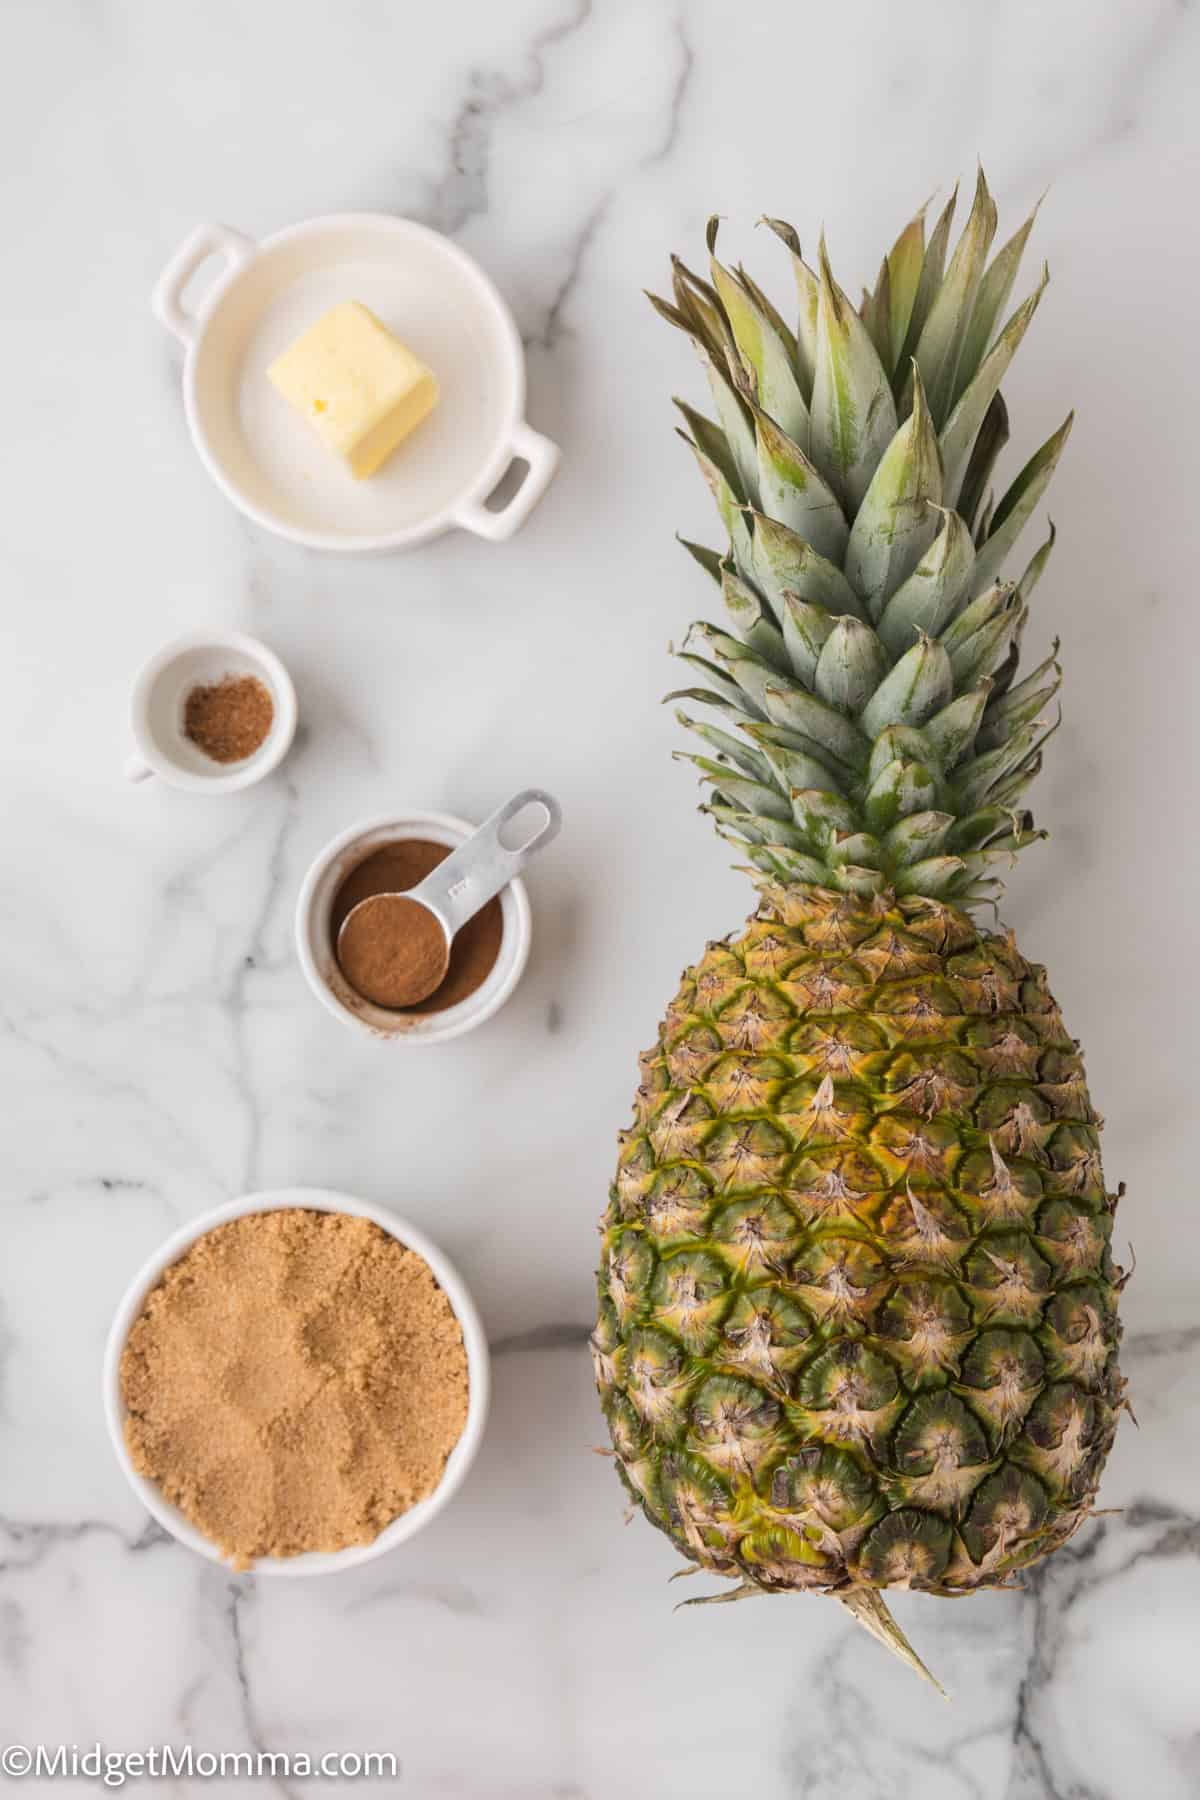 Easy Baked Pineapple Dessert Ingredients. A whole pineapple with ingredients like butter, cinnamon, and brown sugar arranged around it on a marble surface.